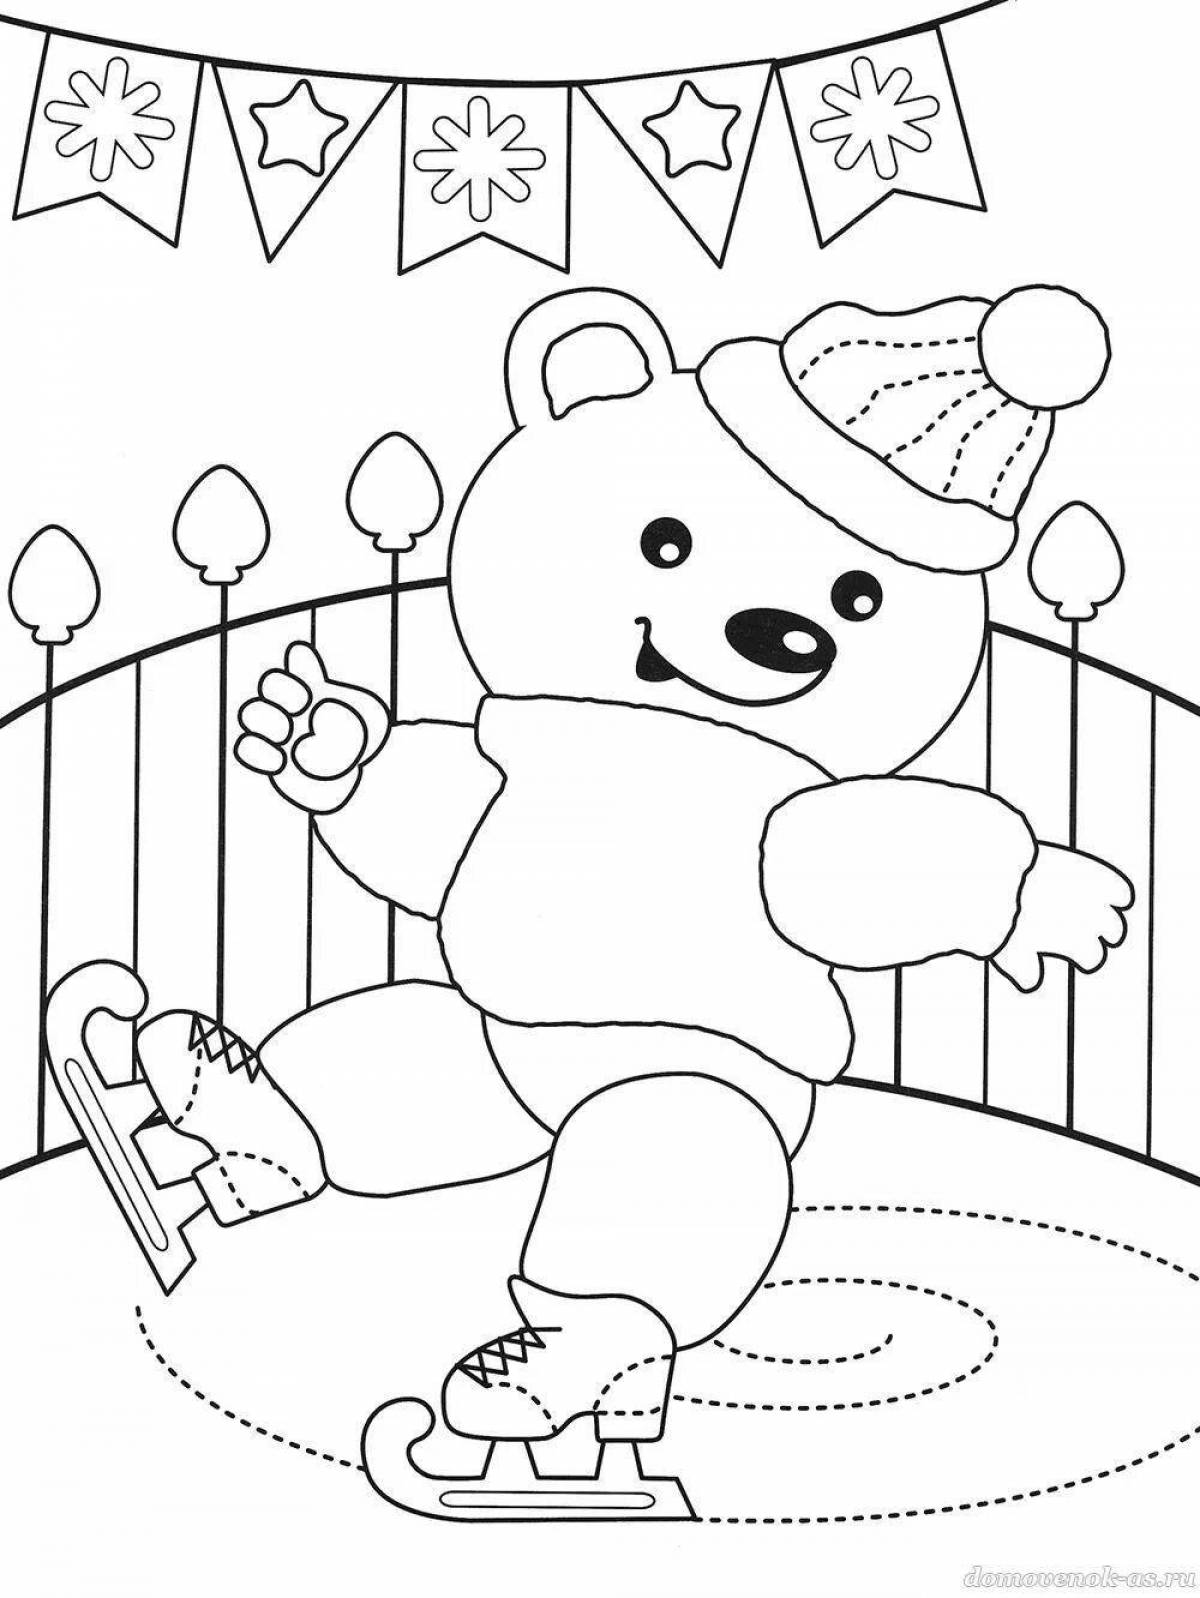 Exquisite coloring book for children 3 years old winter